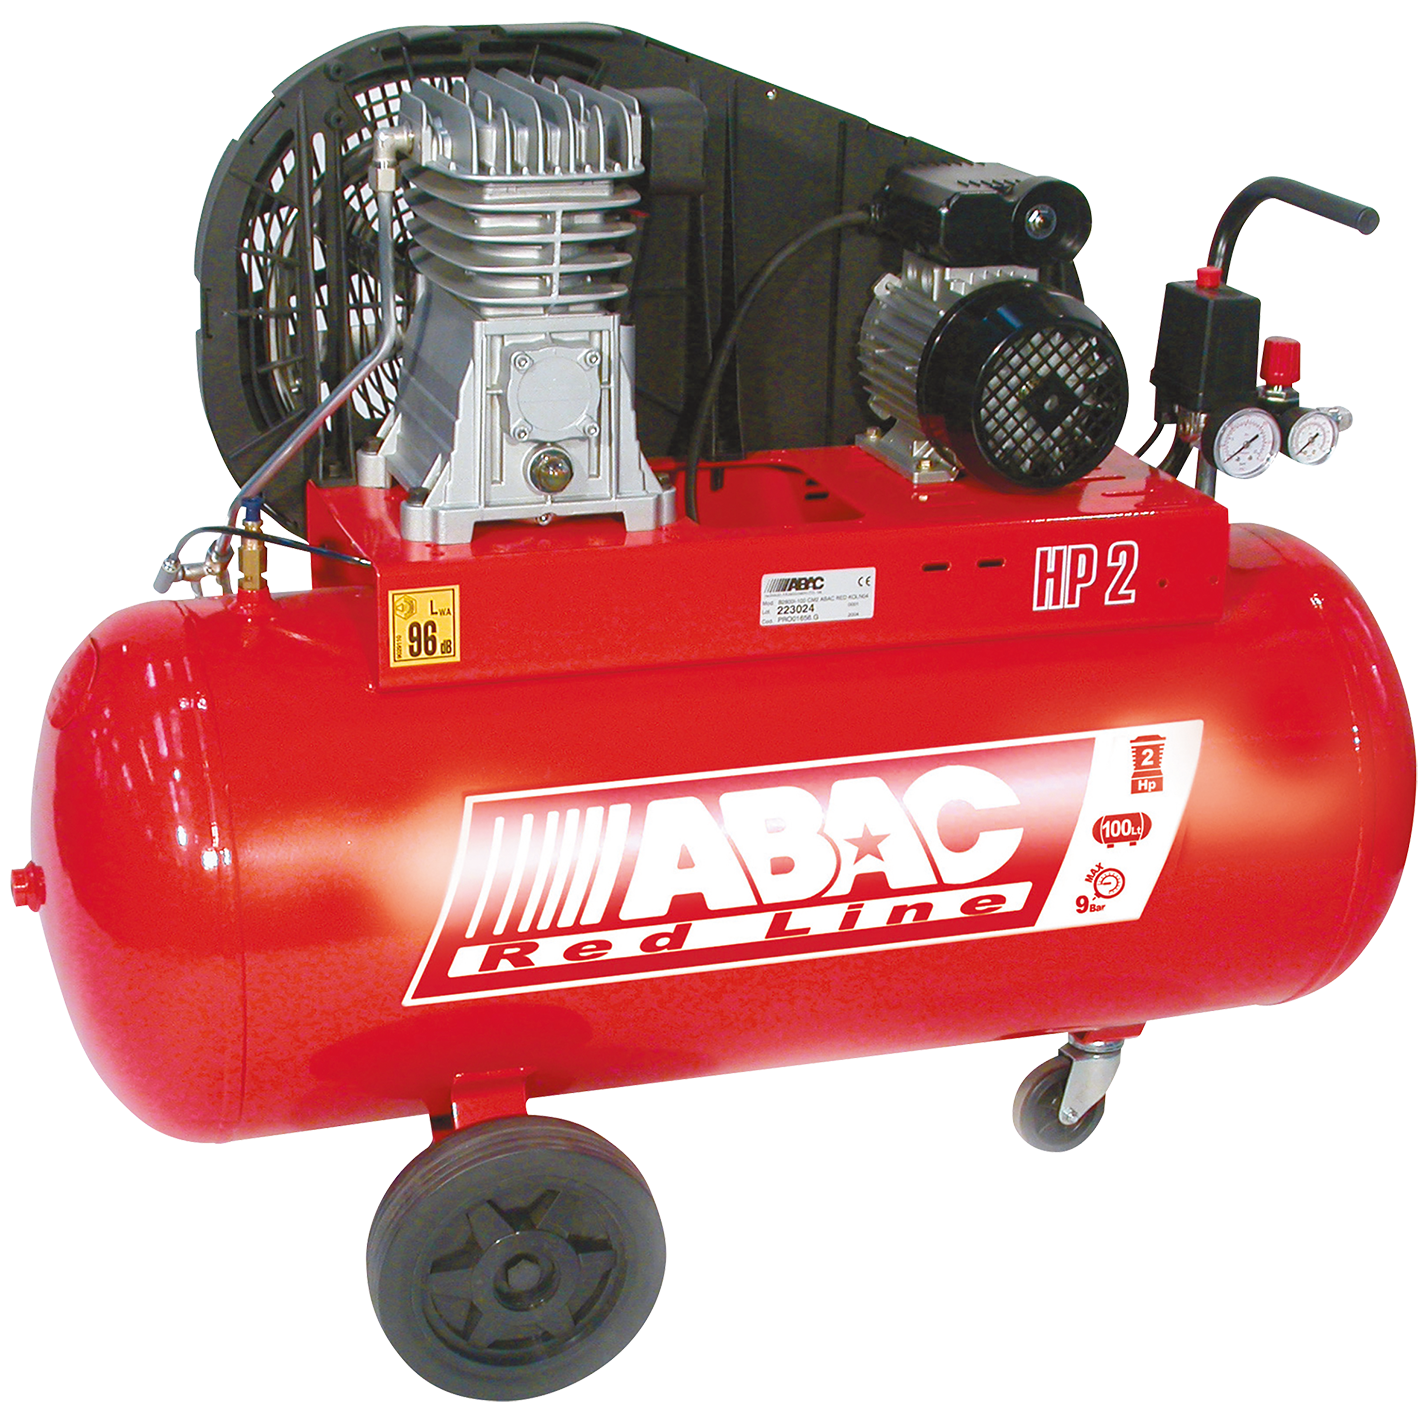 Suppliers of High Quality Portable Compressors UK